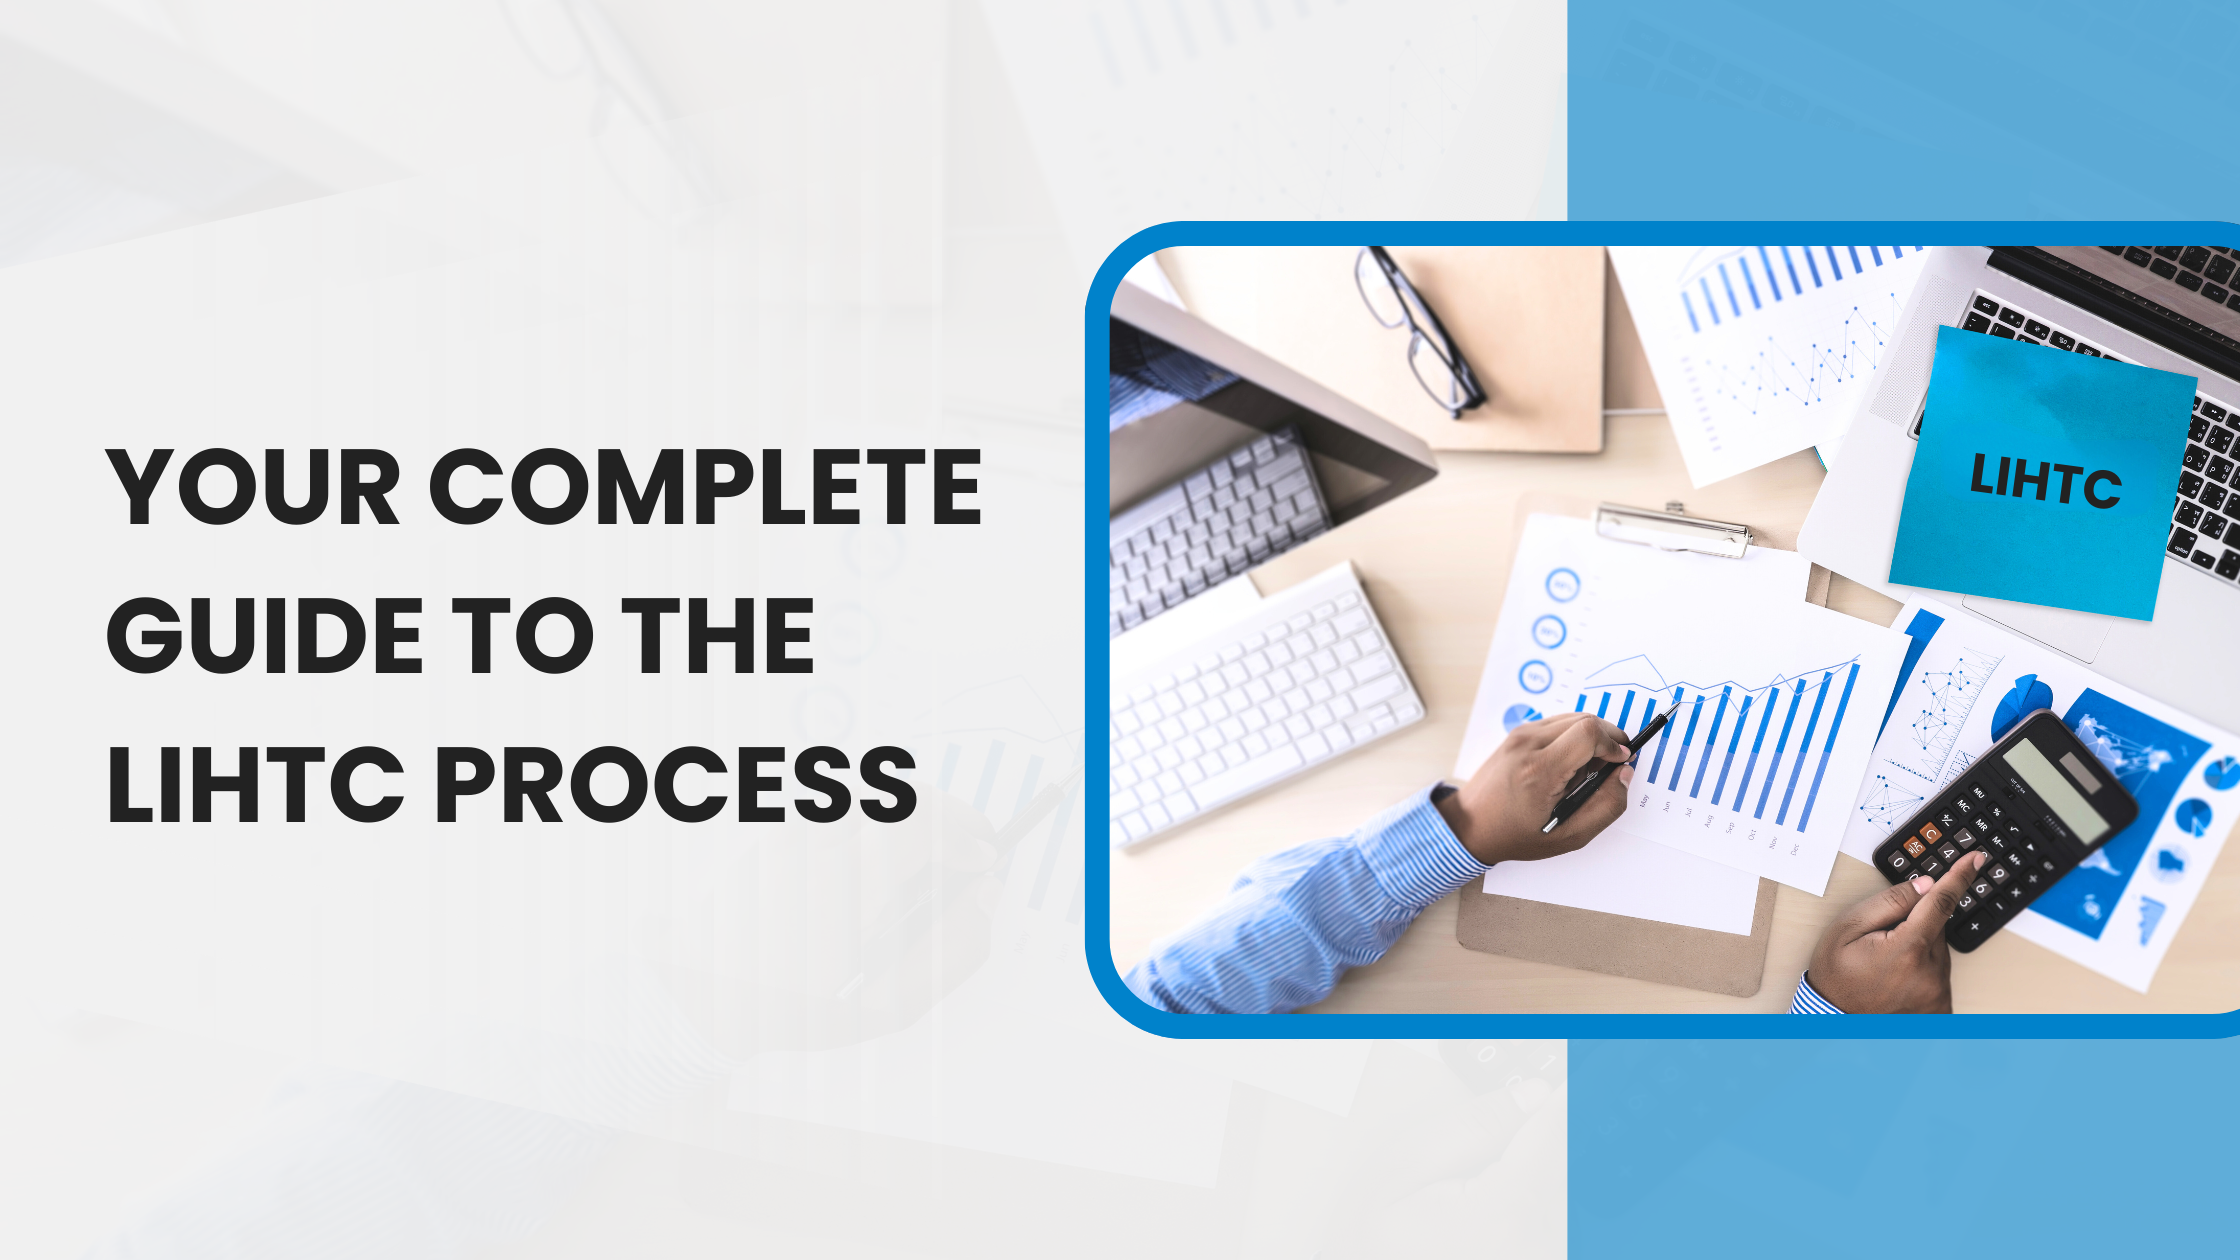 Your Complete Guide to LIHTC Process